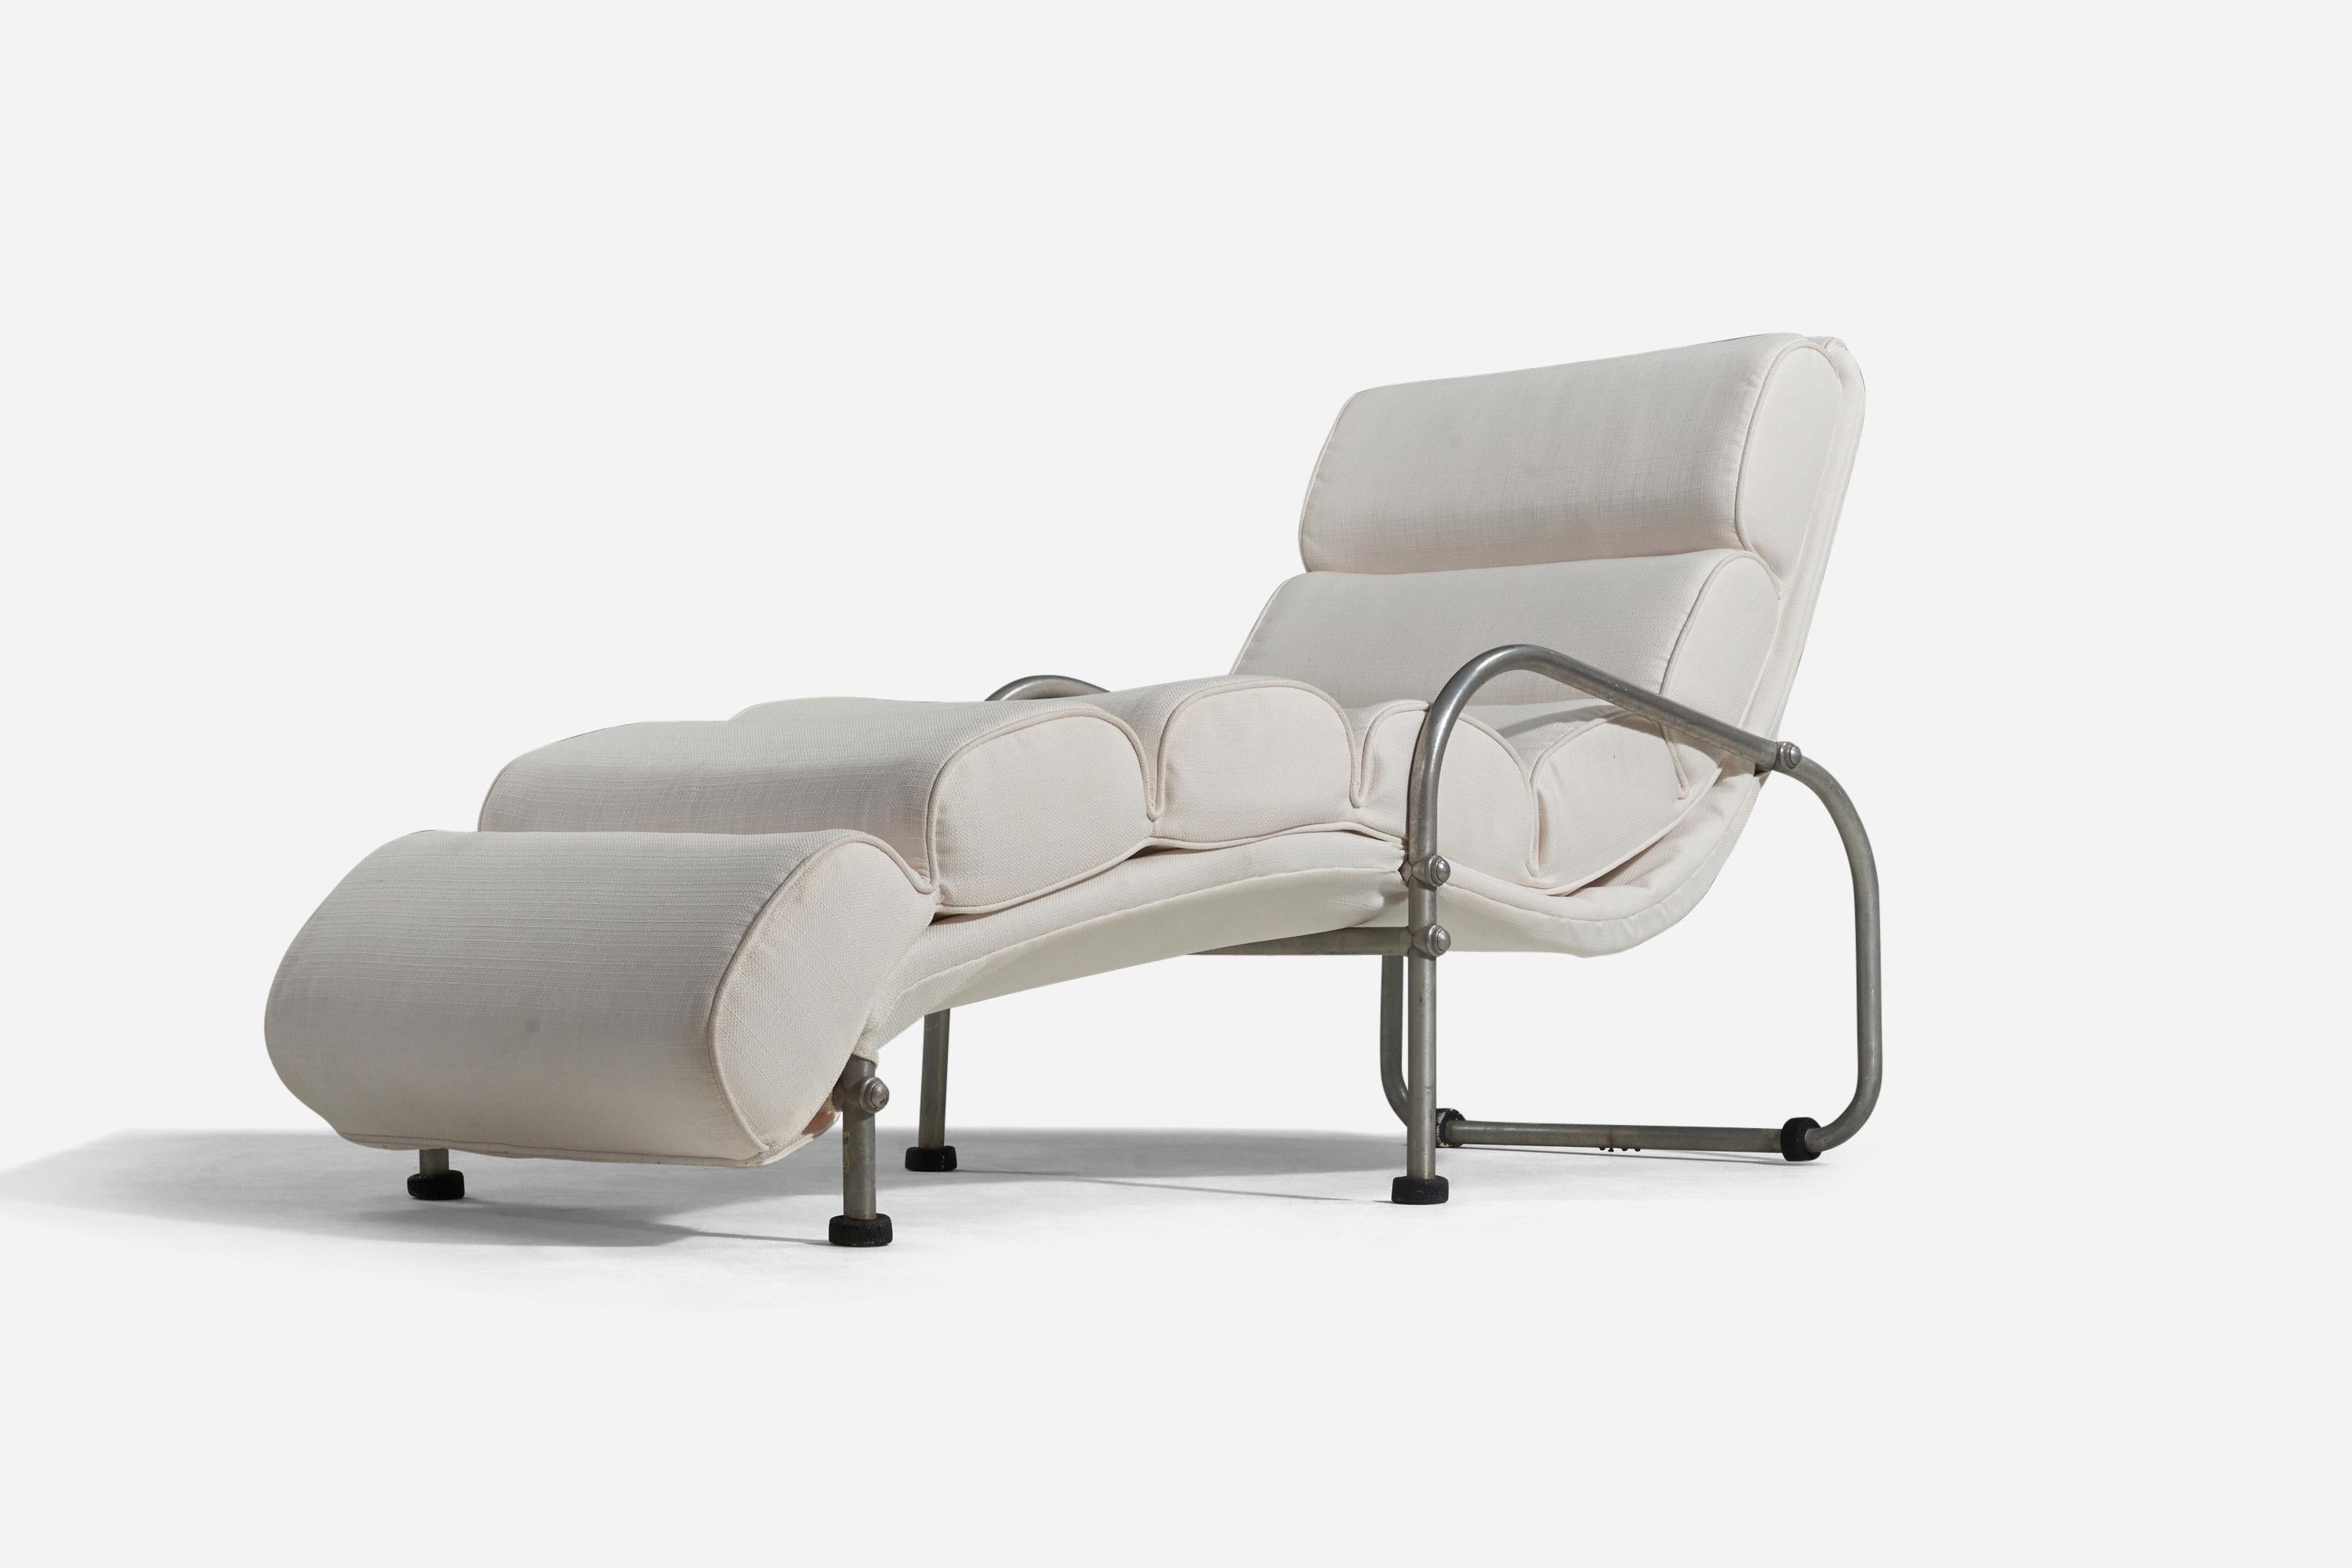 A pair of aluminum and white fabric chaise longues designed and produced by Warren McArthur, USA, c. 1930s.